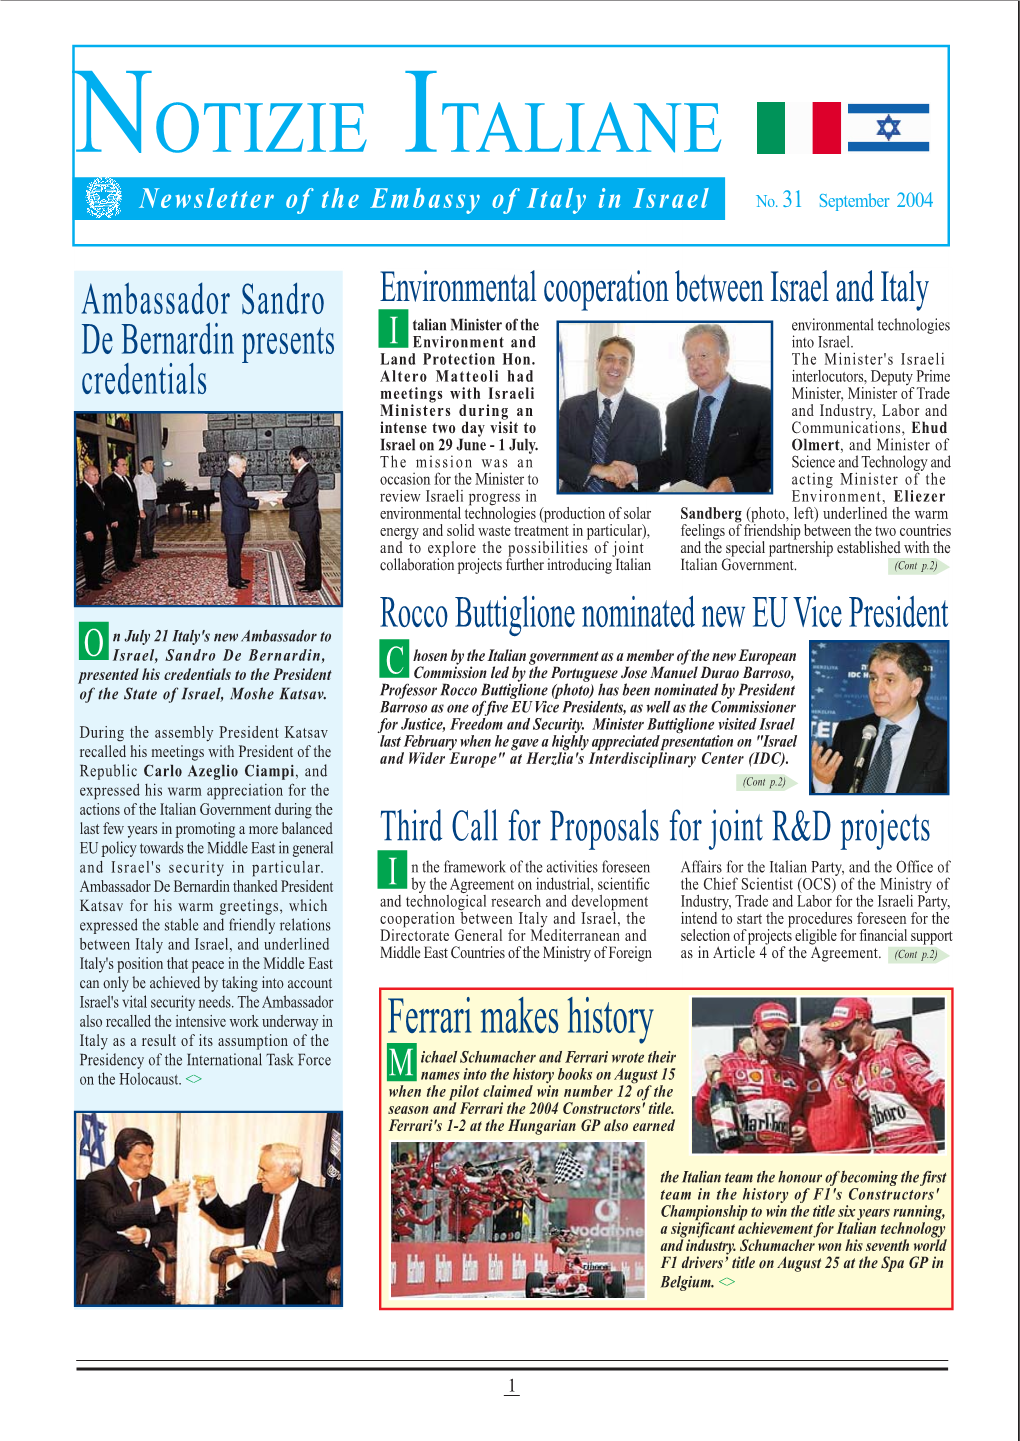 NOTIZIE ITALIANE Newsletter of the Embassy of Italy in Israel No